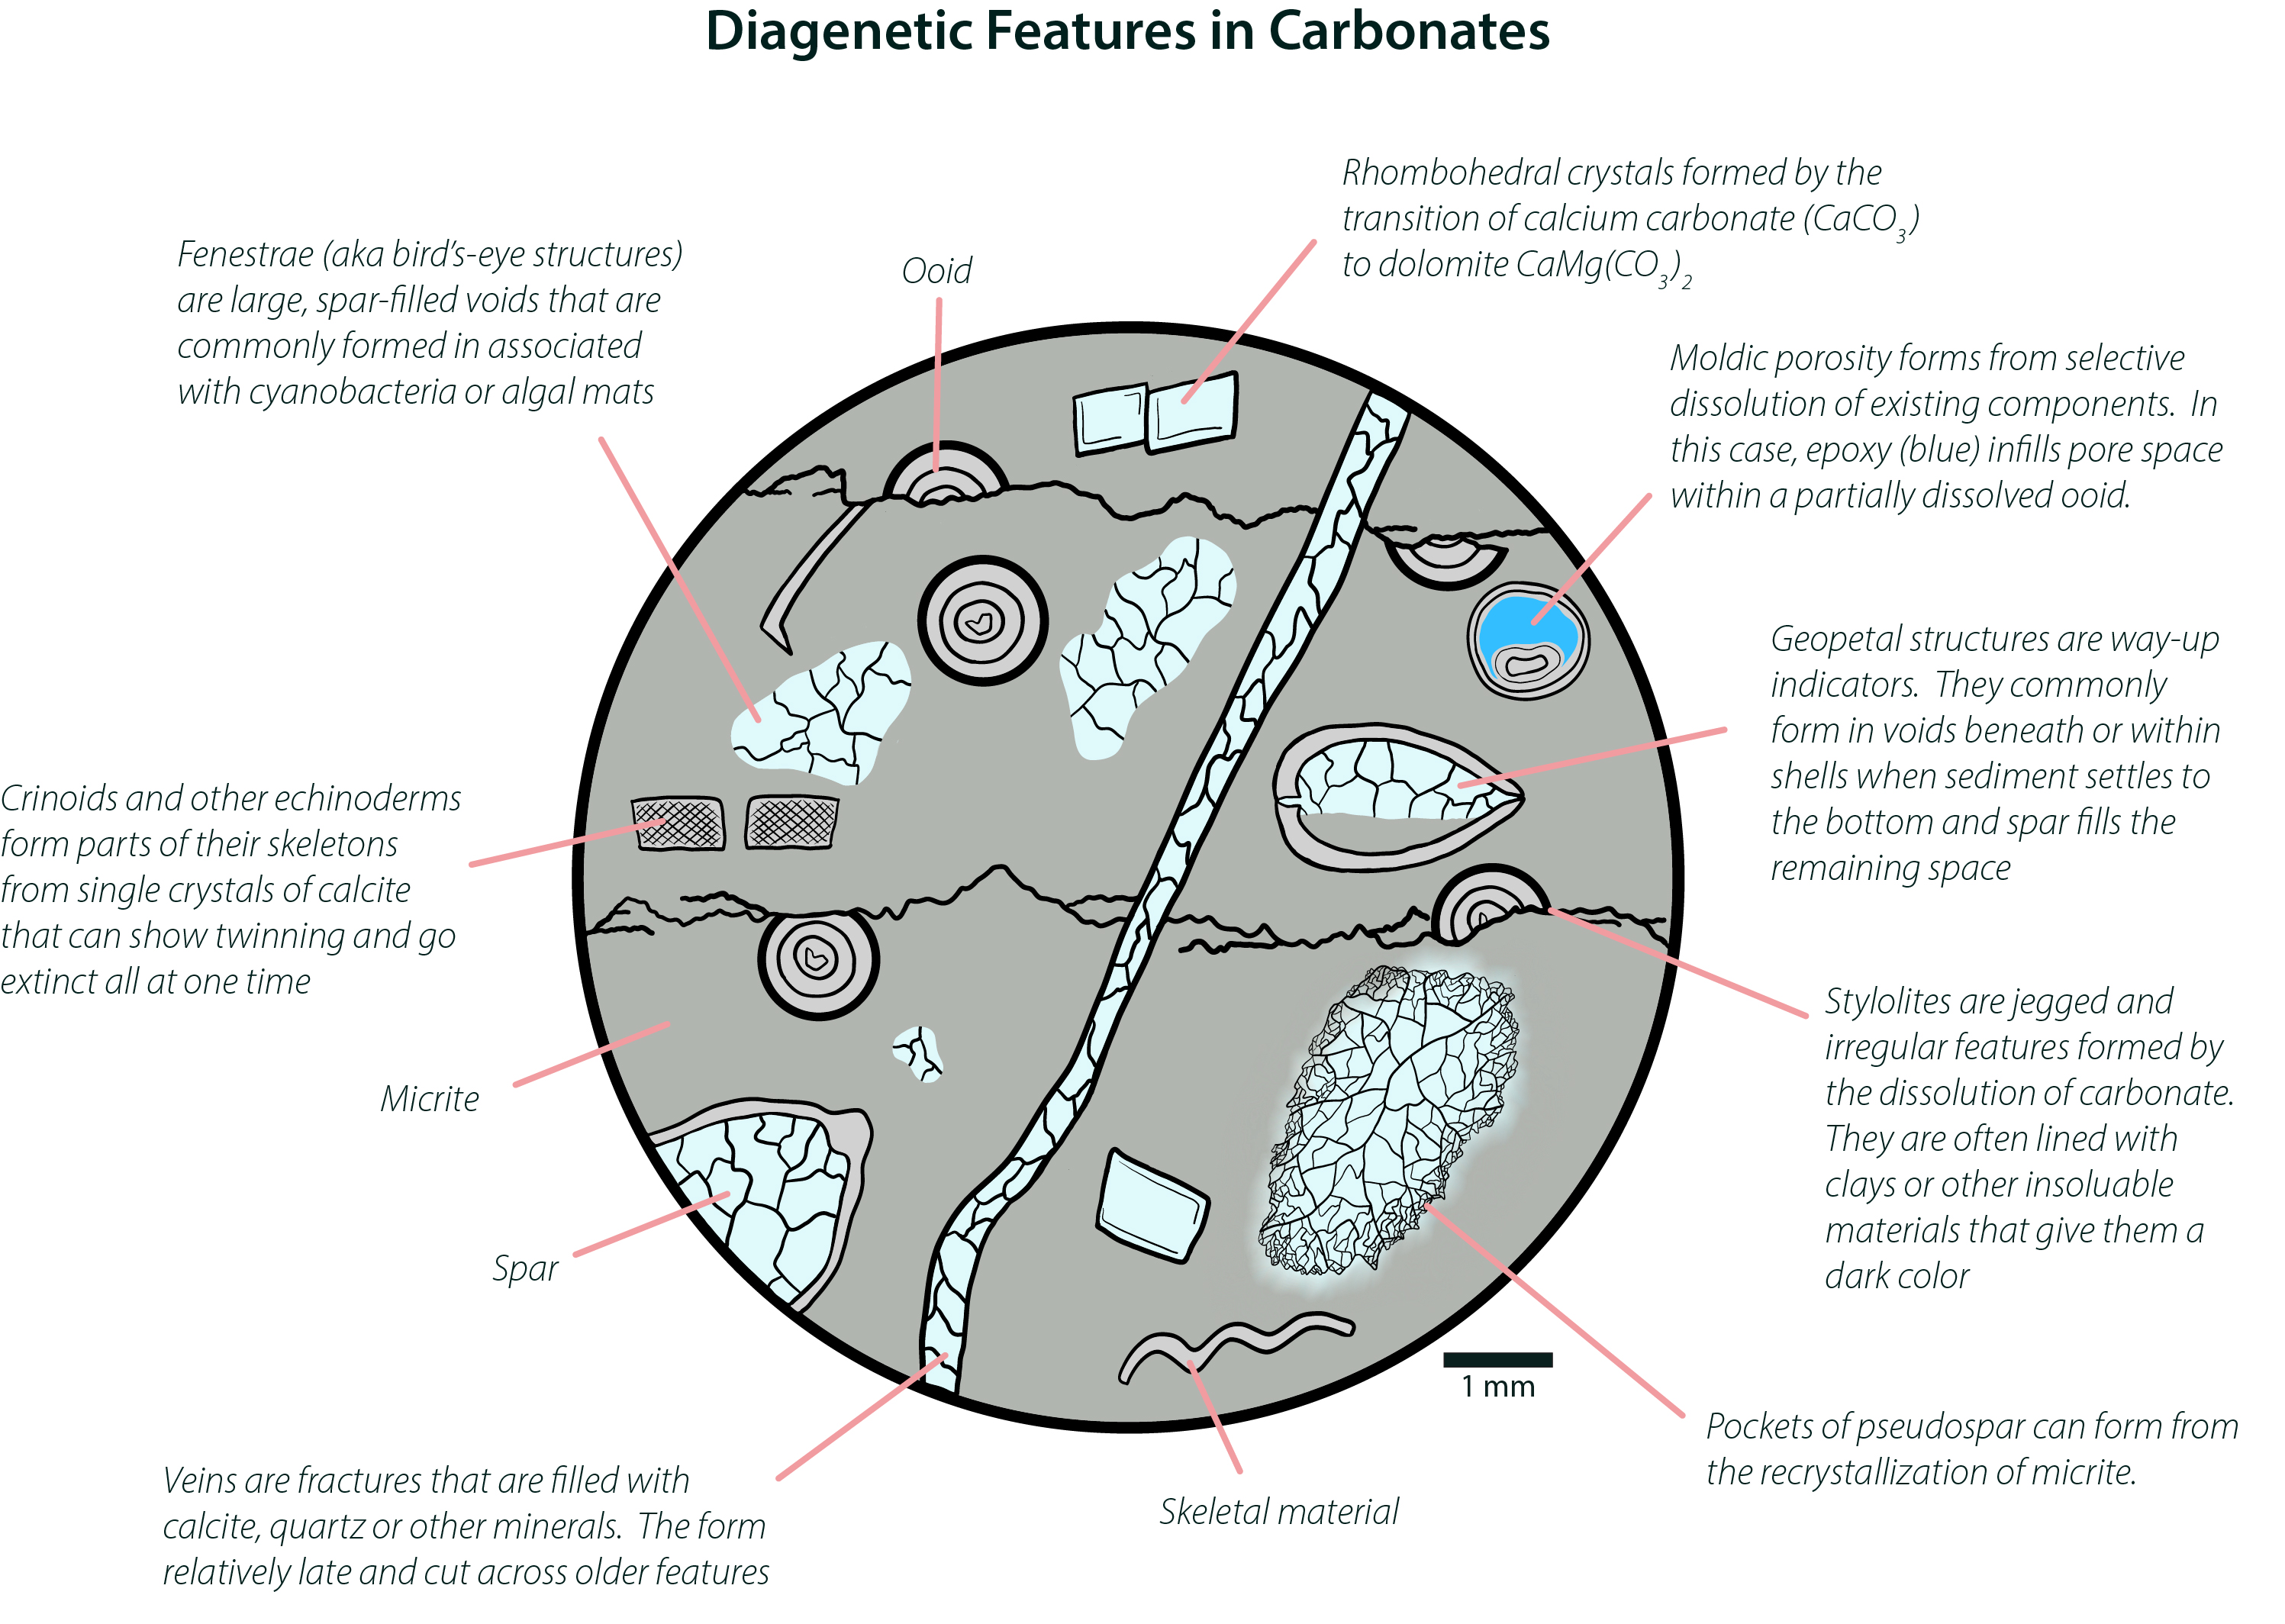 Diagenetic Features in Thin Section.jpg